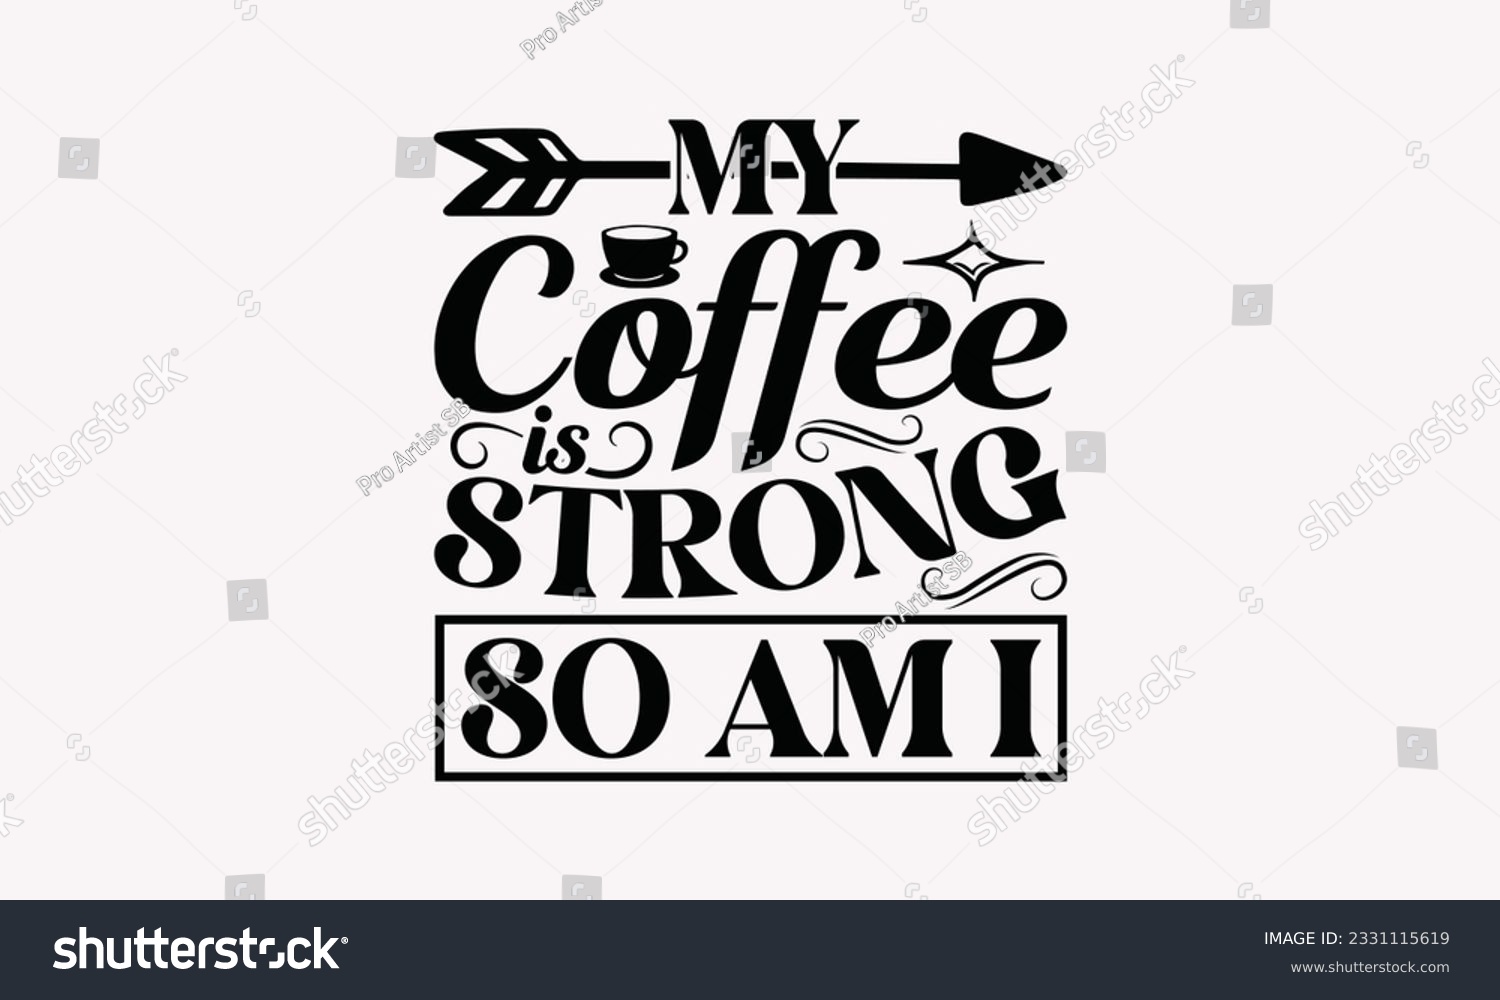 SVG of My coffee is strong so am I - Coffee SVG Design Template, Drink Quotes, Calligraphy graphic design, Typography poster with old style camera and quote. svg